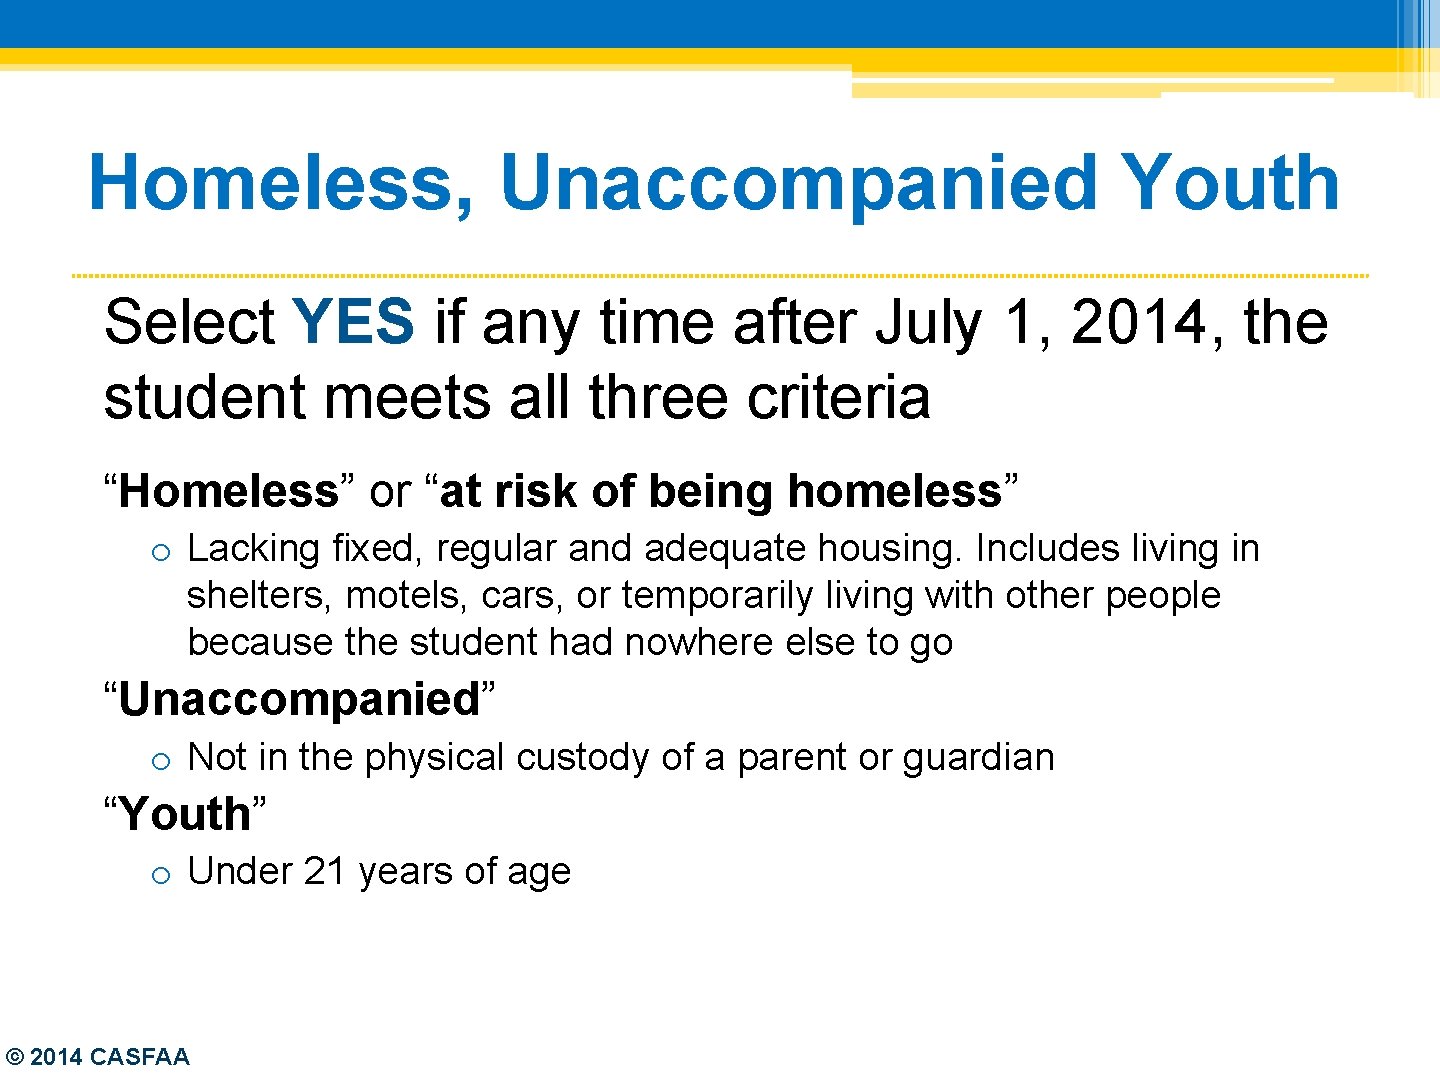 Homeless, Unaccompanied Youth Select YES if any time after July 1, 2014, the student